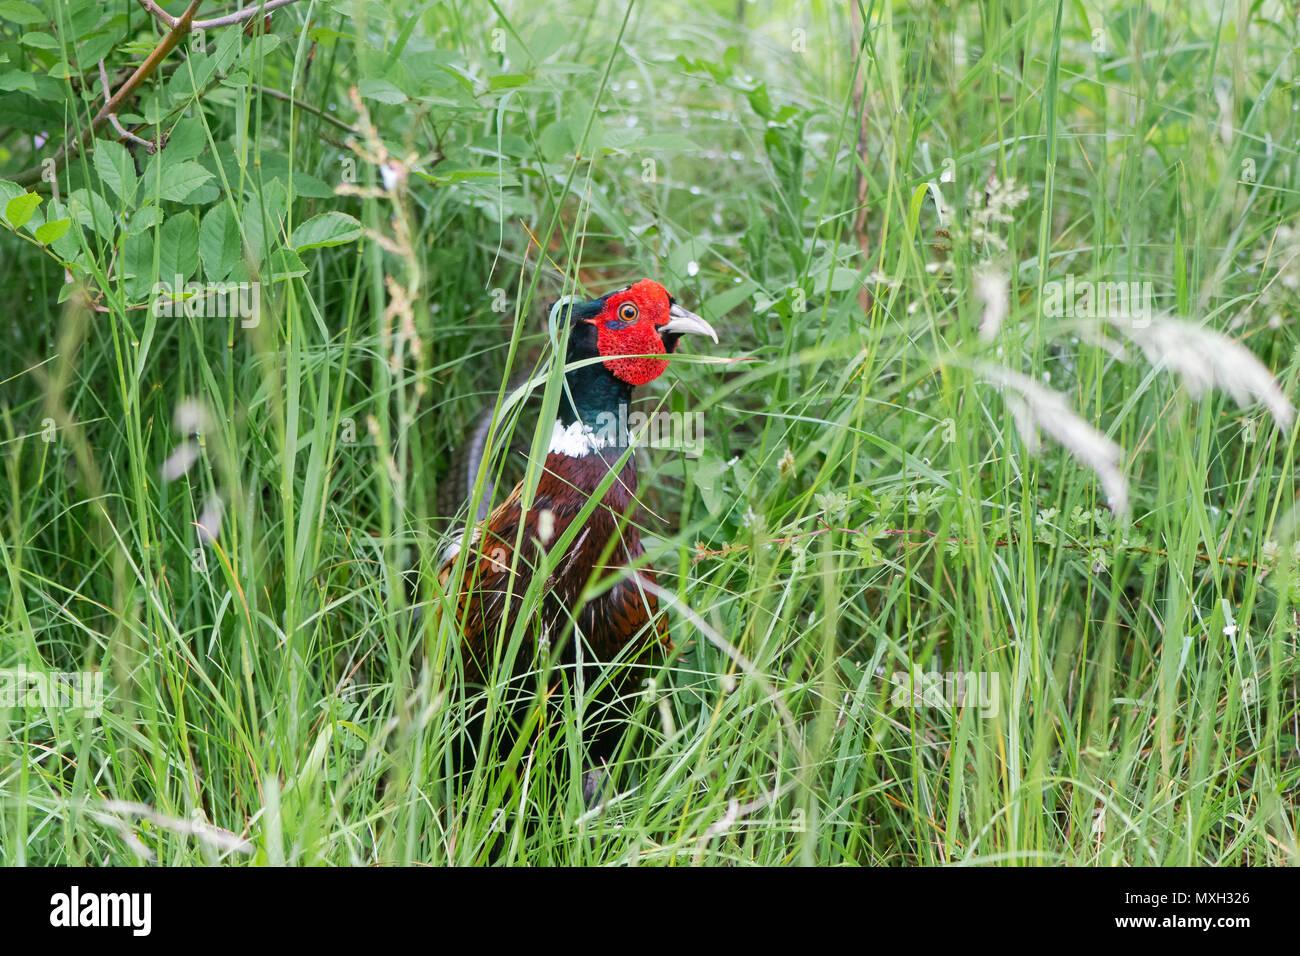 Cock pheasant (Phasianus colchicus) amongst grass. Male game bird in the family Phasianidae with distinctive red wattle Stock Photo